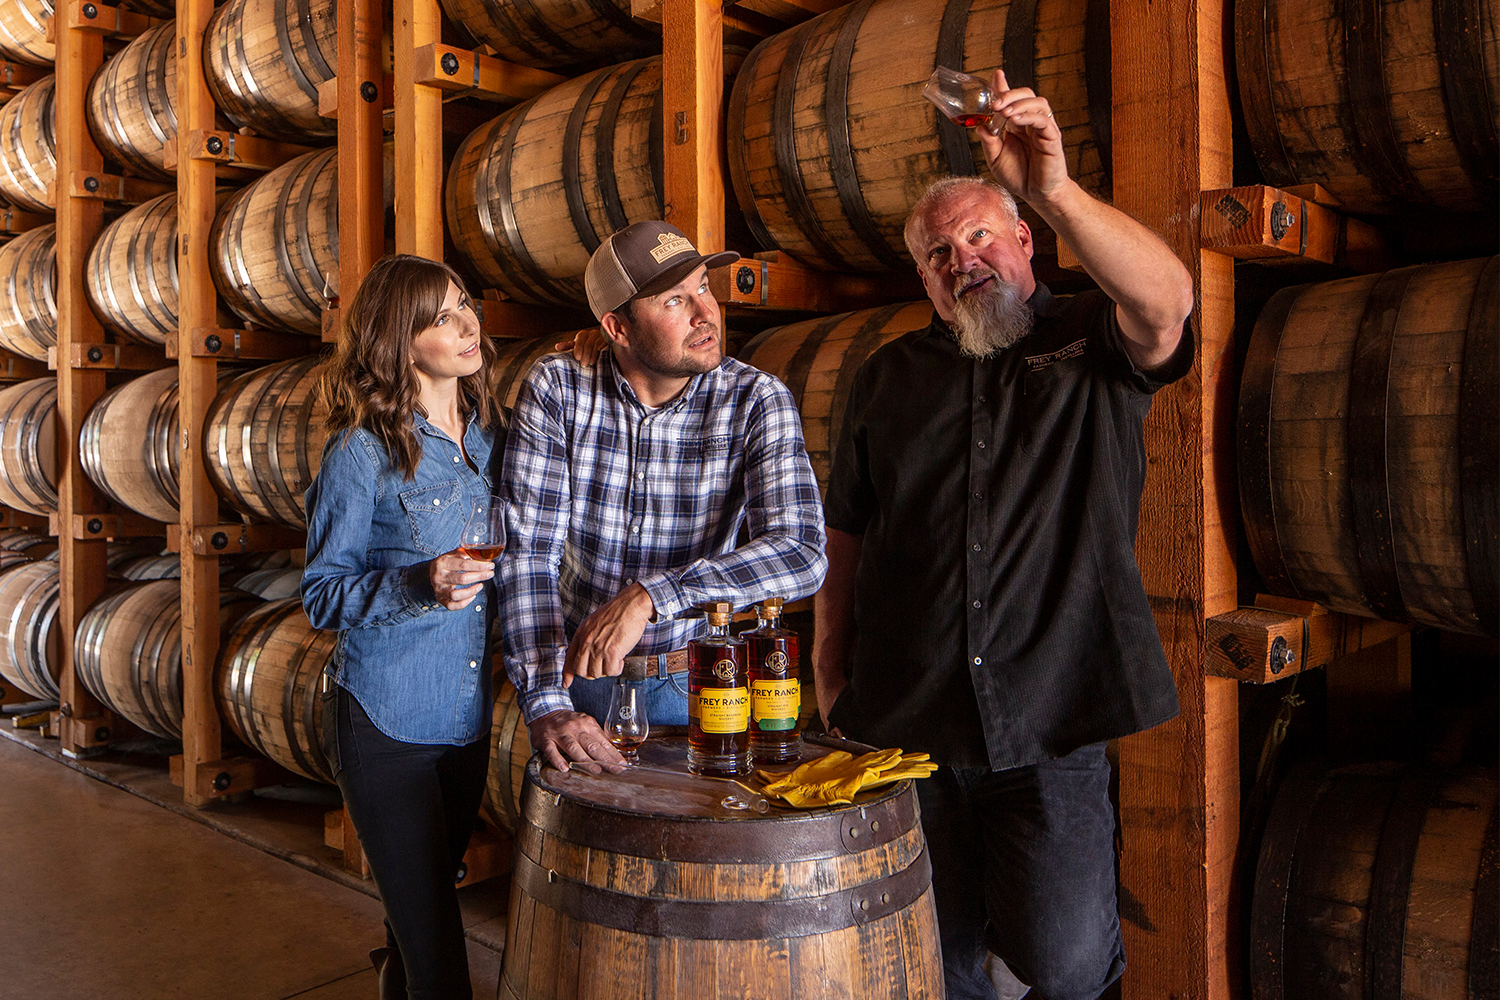 Ashley Frey, Colby Frey and distiller Russell Wedlake of the Frey Ranch distillery in a barrel room